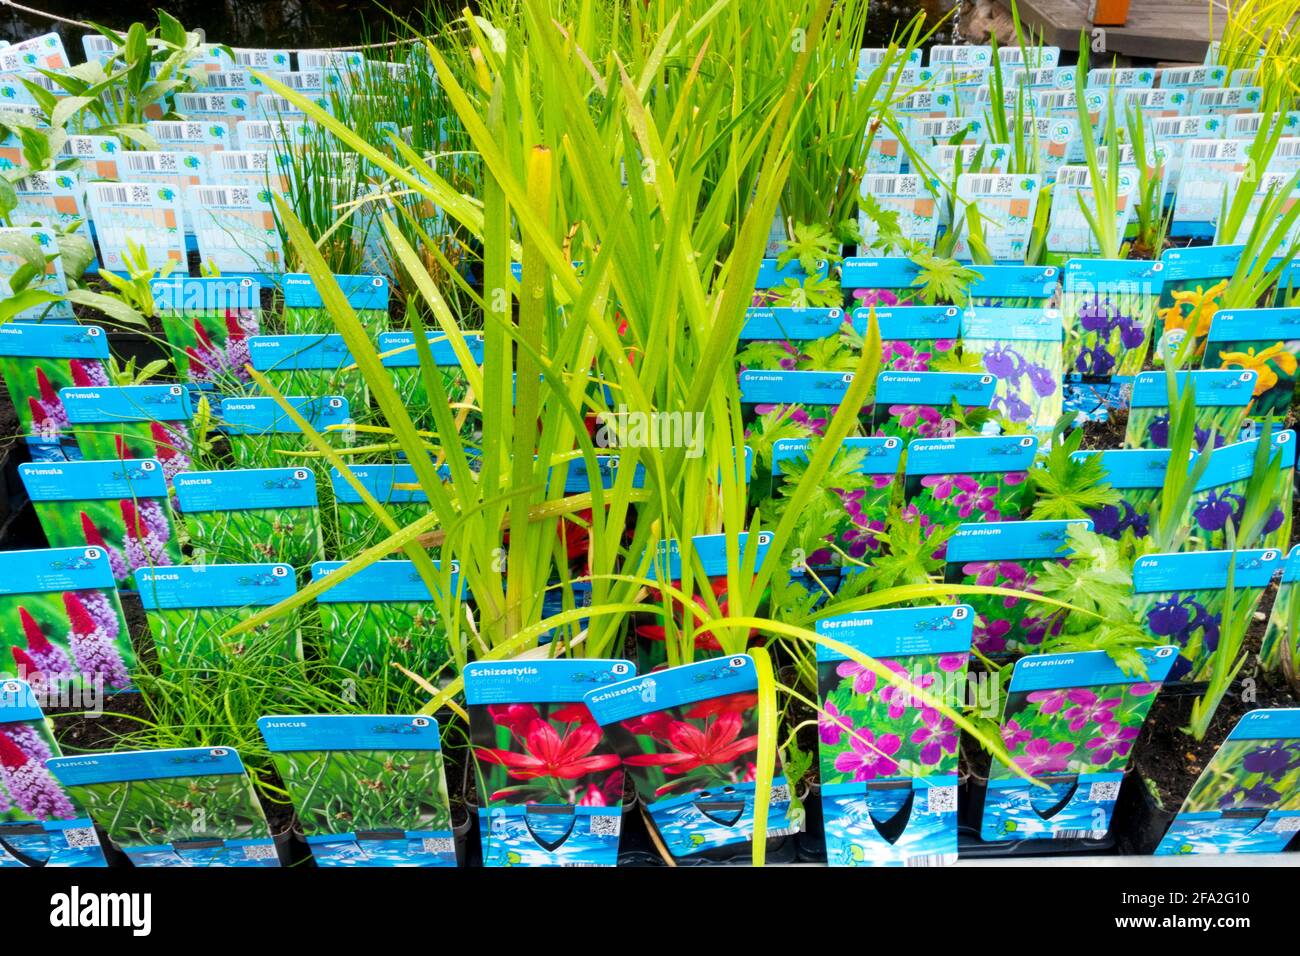 Young perennial plants display for sale in a garden center in pots and labeled Stock Photo